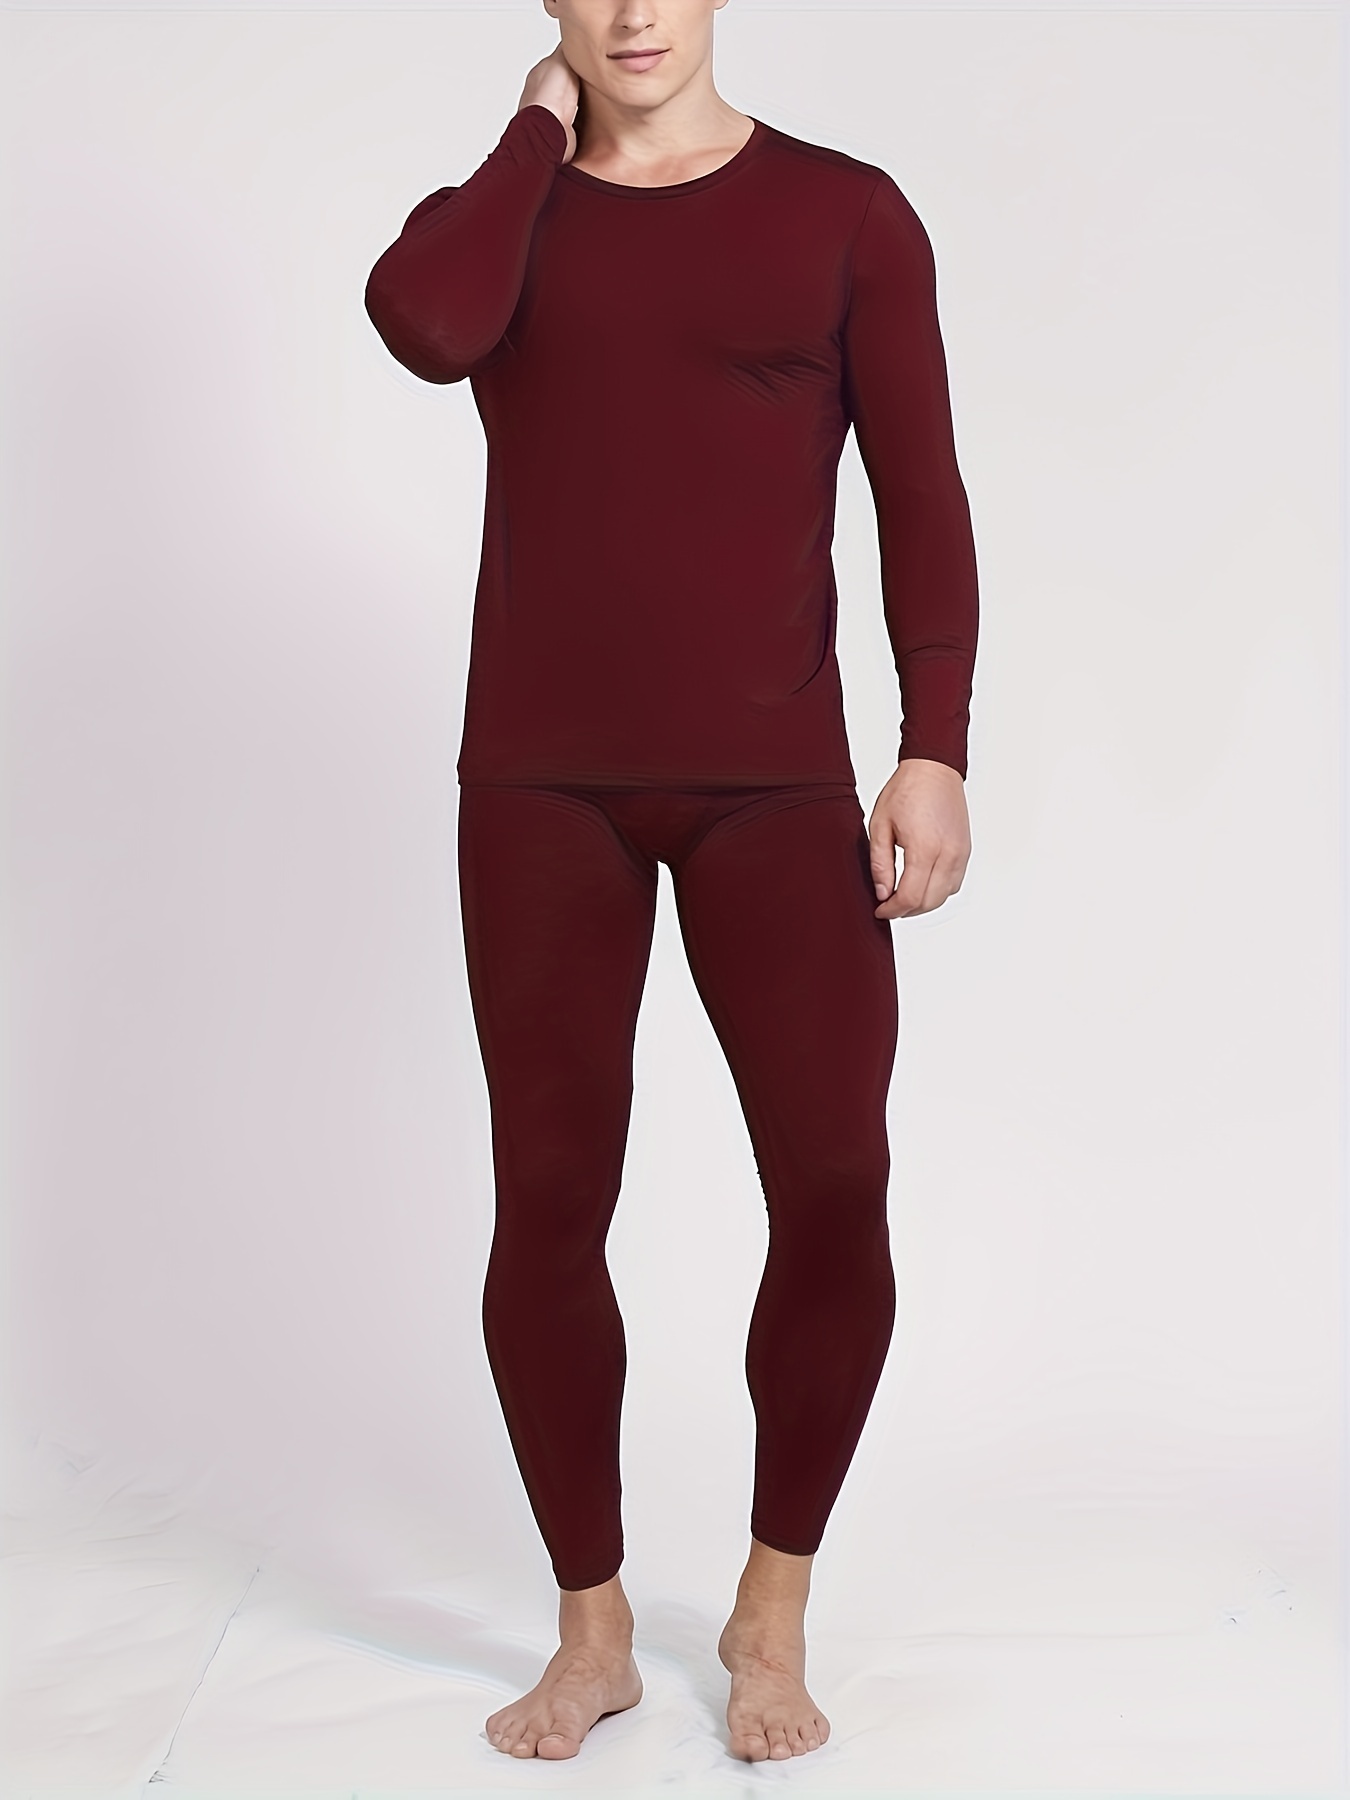 Men's Thermal Underwear Set Long Johns with Fleece Lined Base Layer  Thermals Sets for Men